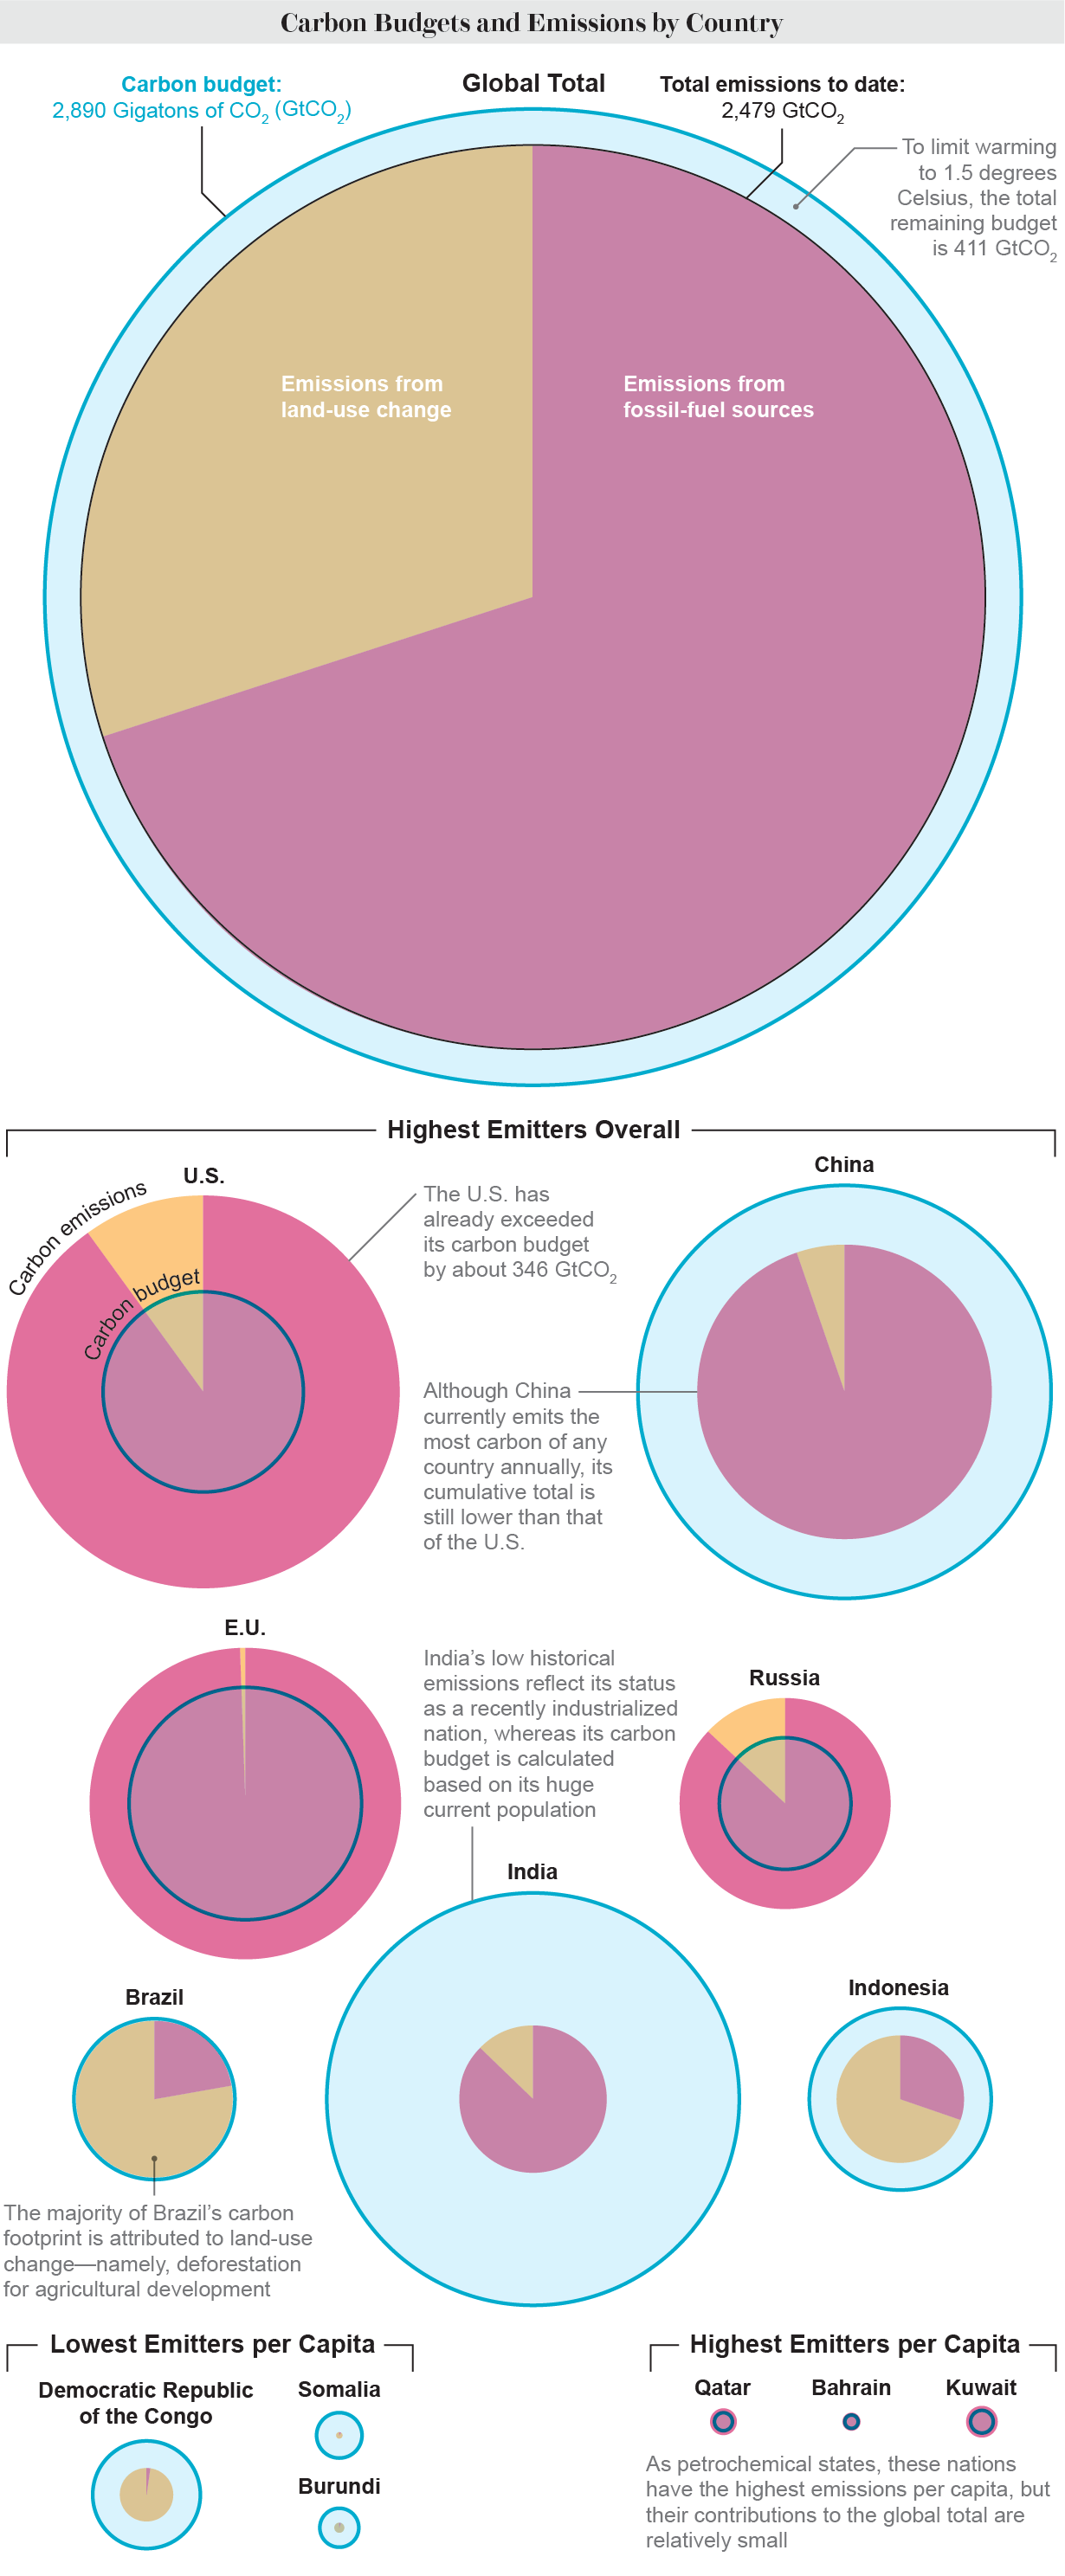 Overlaid circles and pie charts are scaled to show individual countries’ carbon budgets and total emissions to date from fossil fuels and land use change.